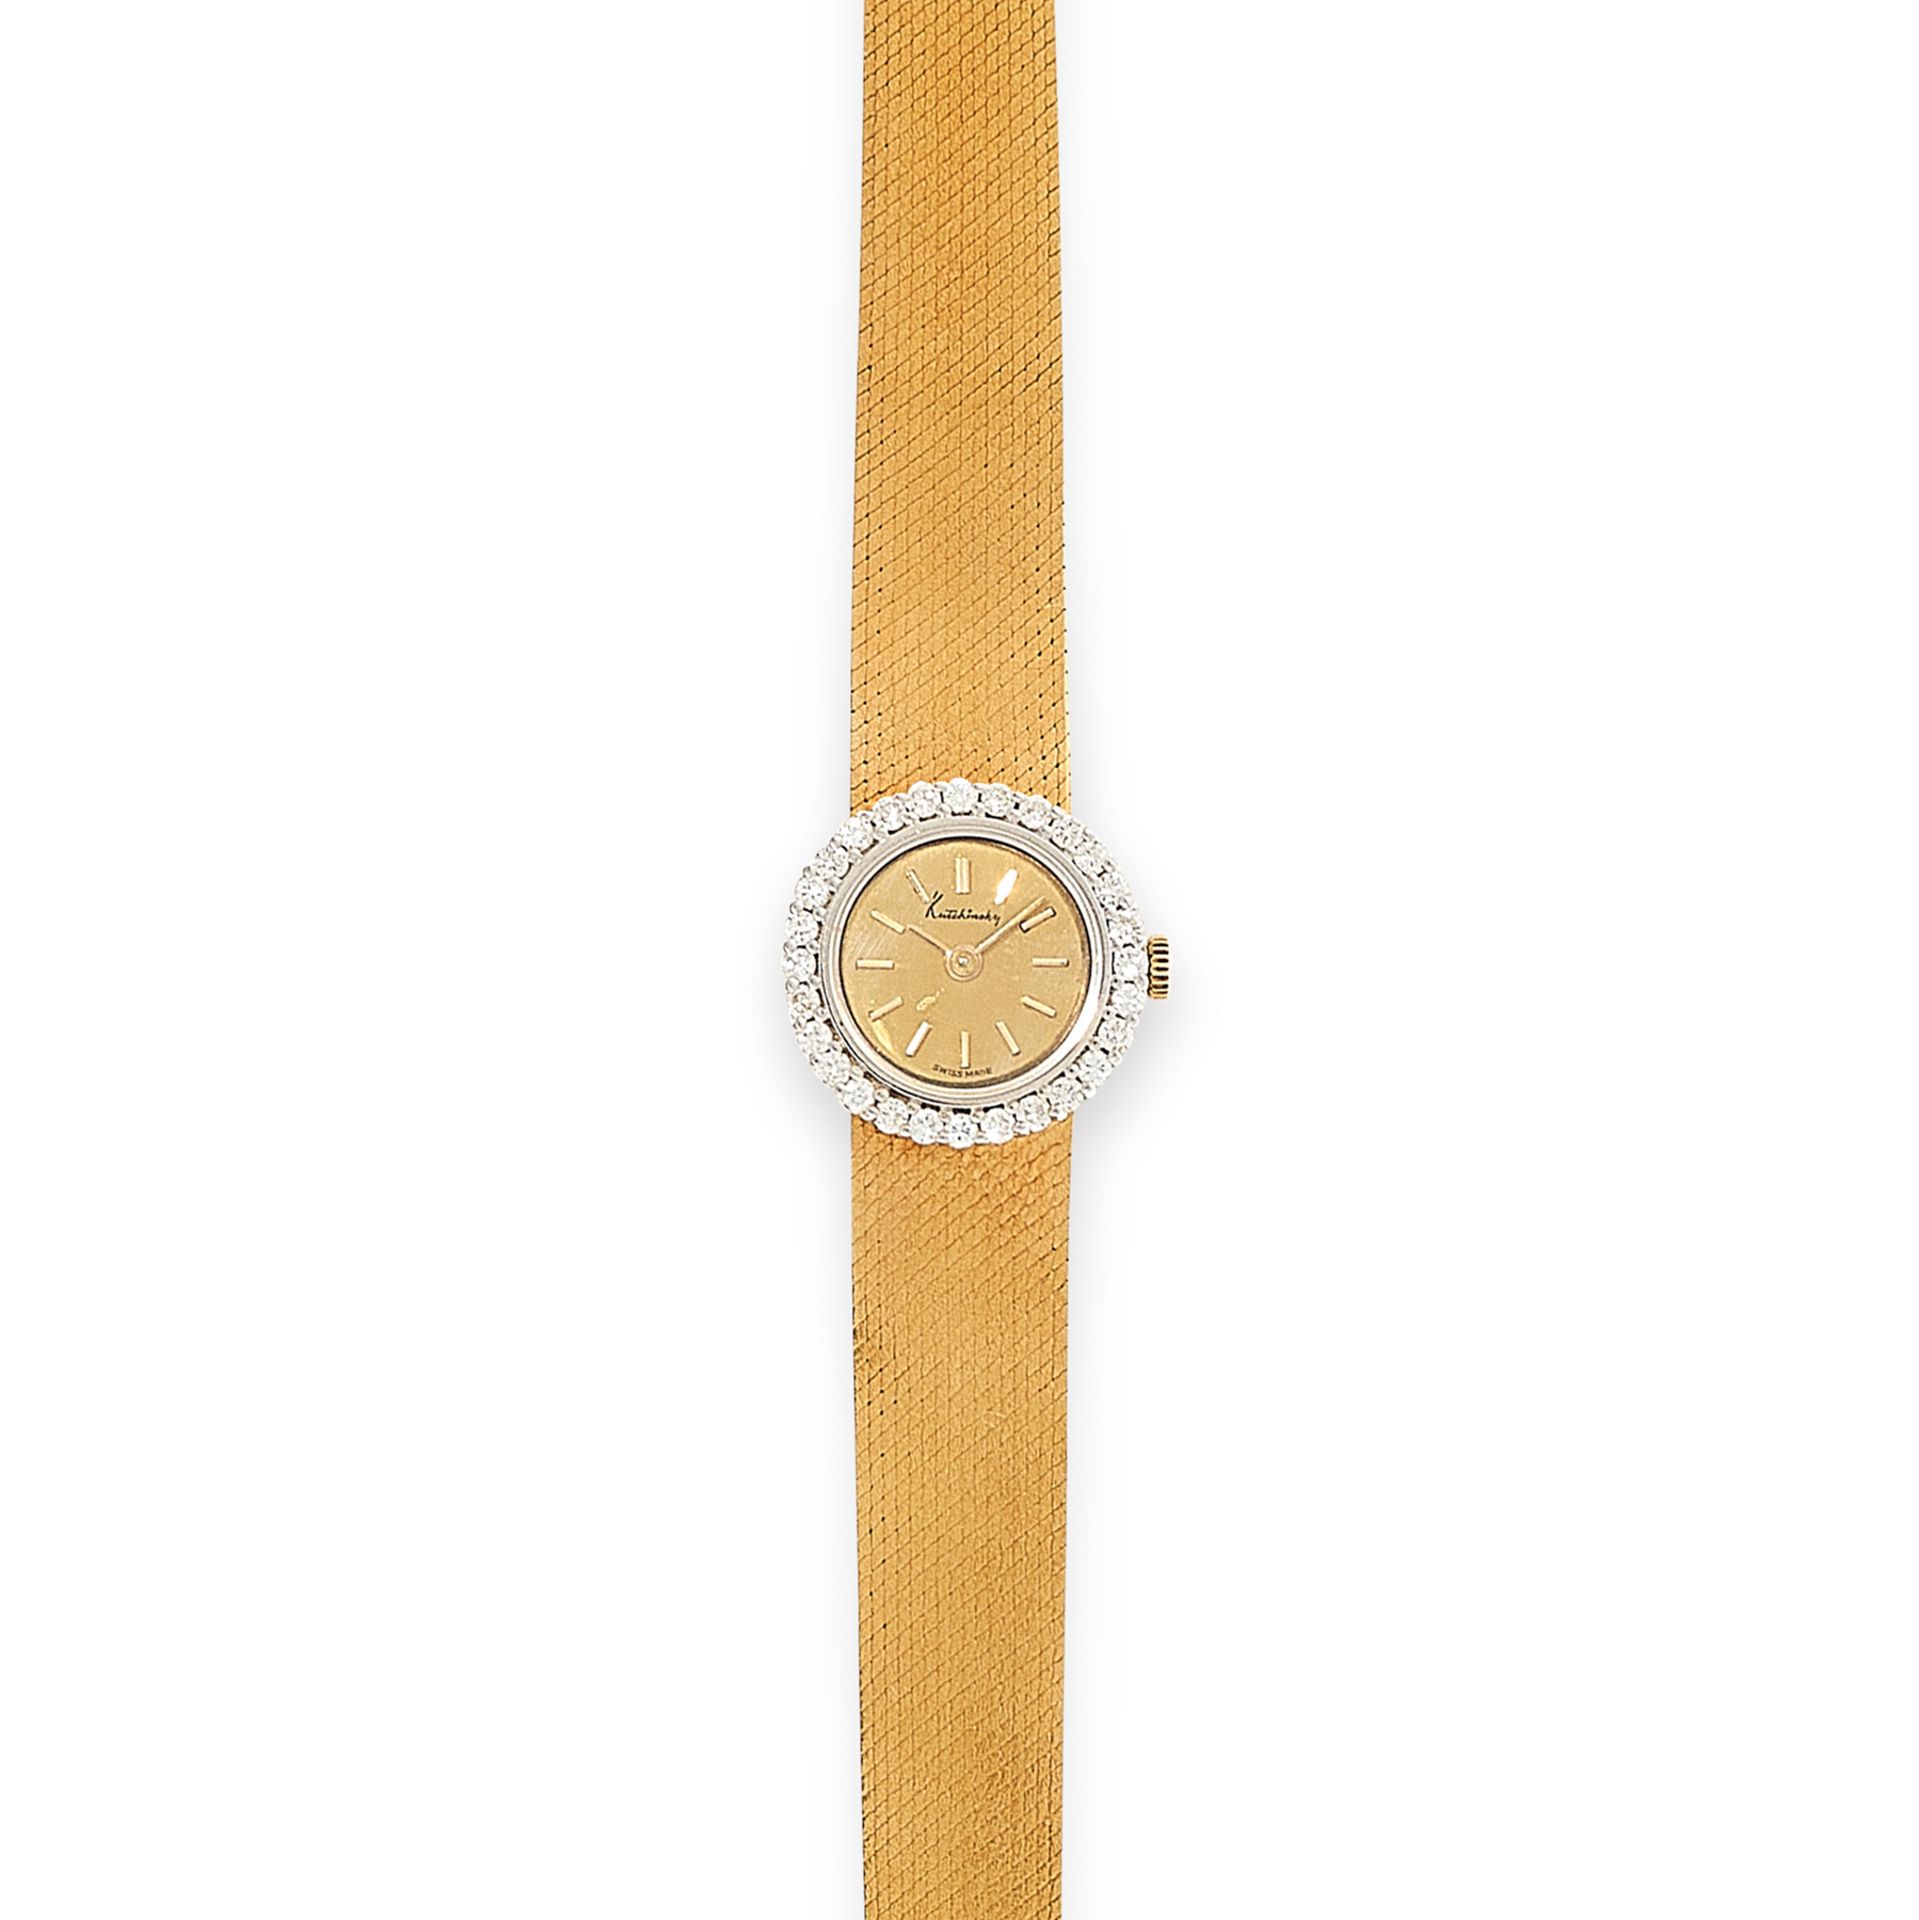 A VINTAGE DIAMOND WRIST WATCH, KUTCHINSKY 1971 in 18ct yellow gold, the circular face within a